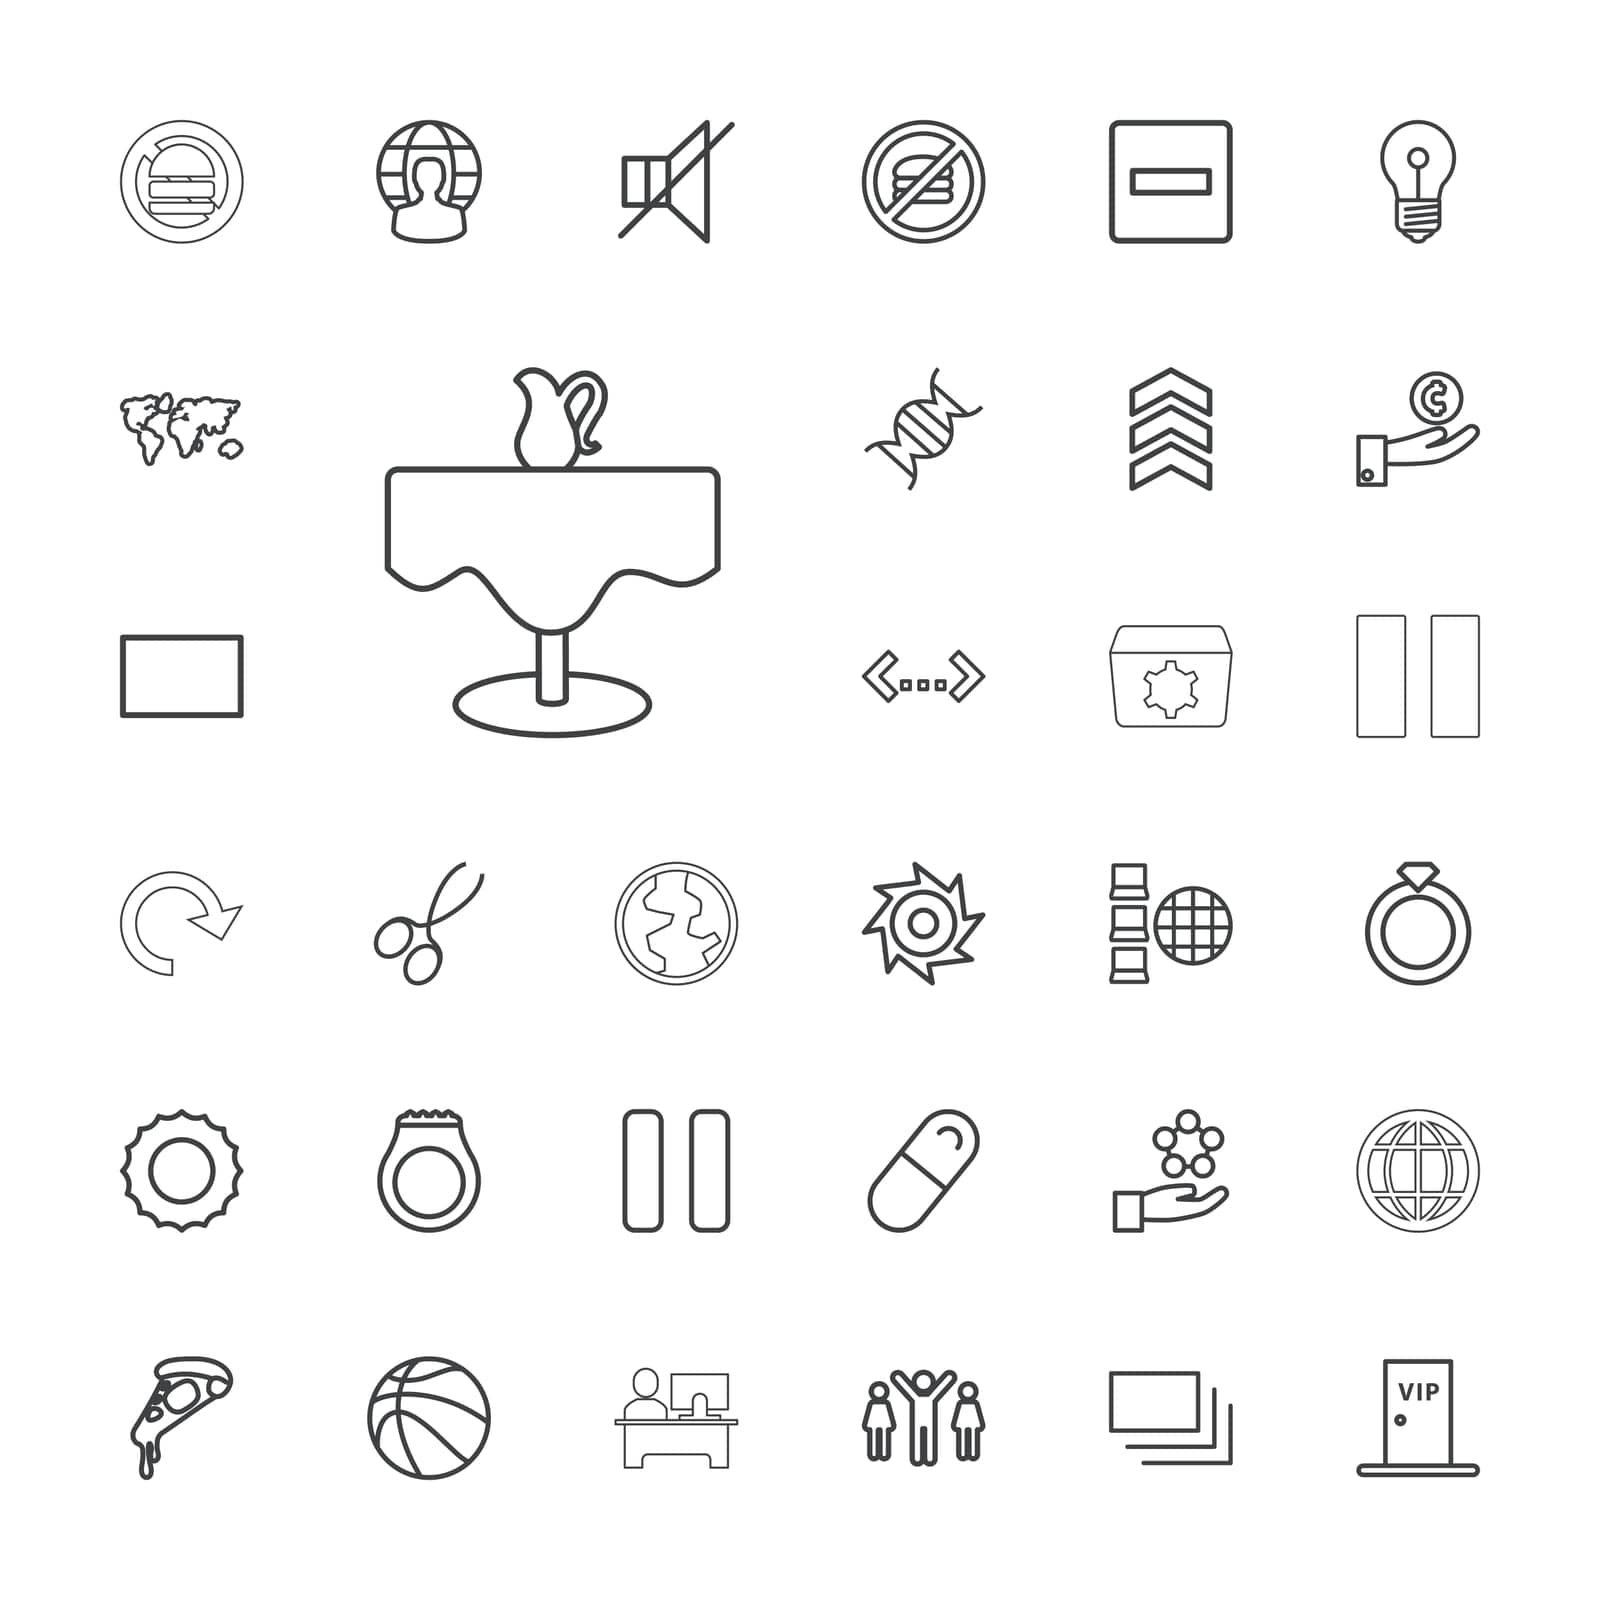 no,minus,arrow,ring,sound,icon,sun,pill,basketball,world,reload,pizza,dna,vector,celebrating,map,table,hand,on,set,in,restaurant,victory,saw,food,pause,scissors,keyhole,fast,globe,round,burst,manicure,atom,user,quotation,internet,coin,gear